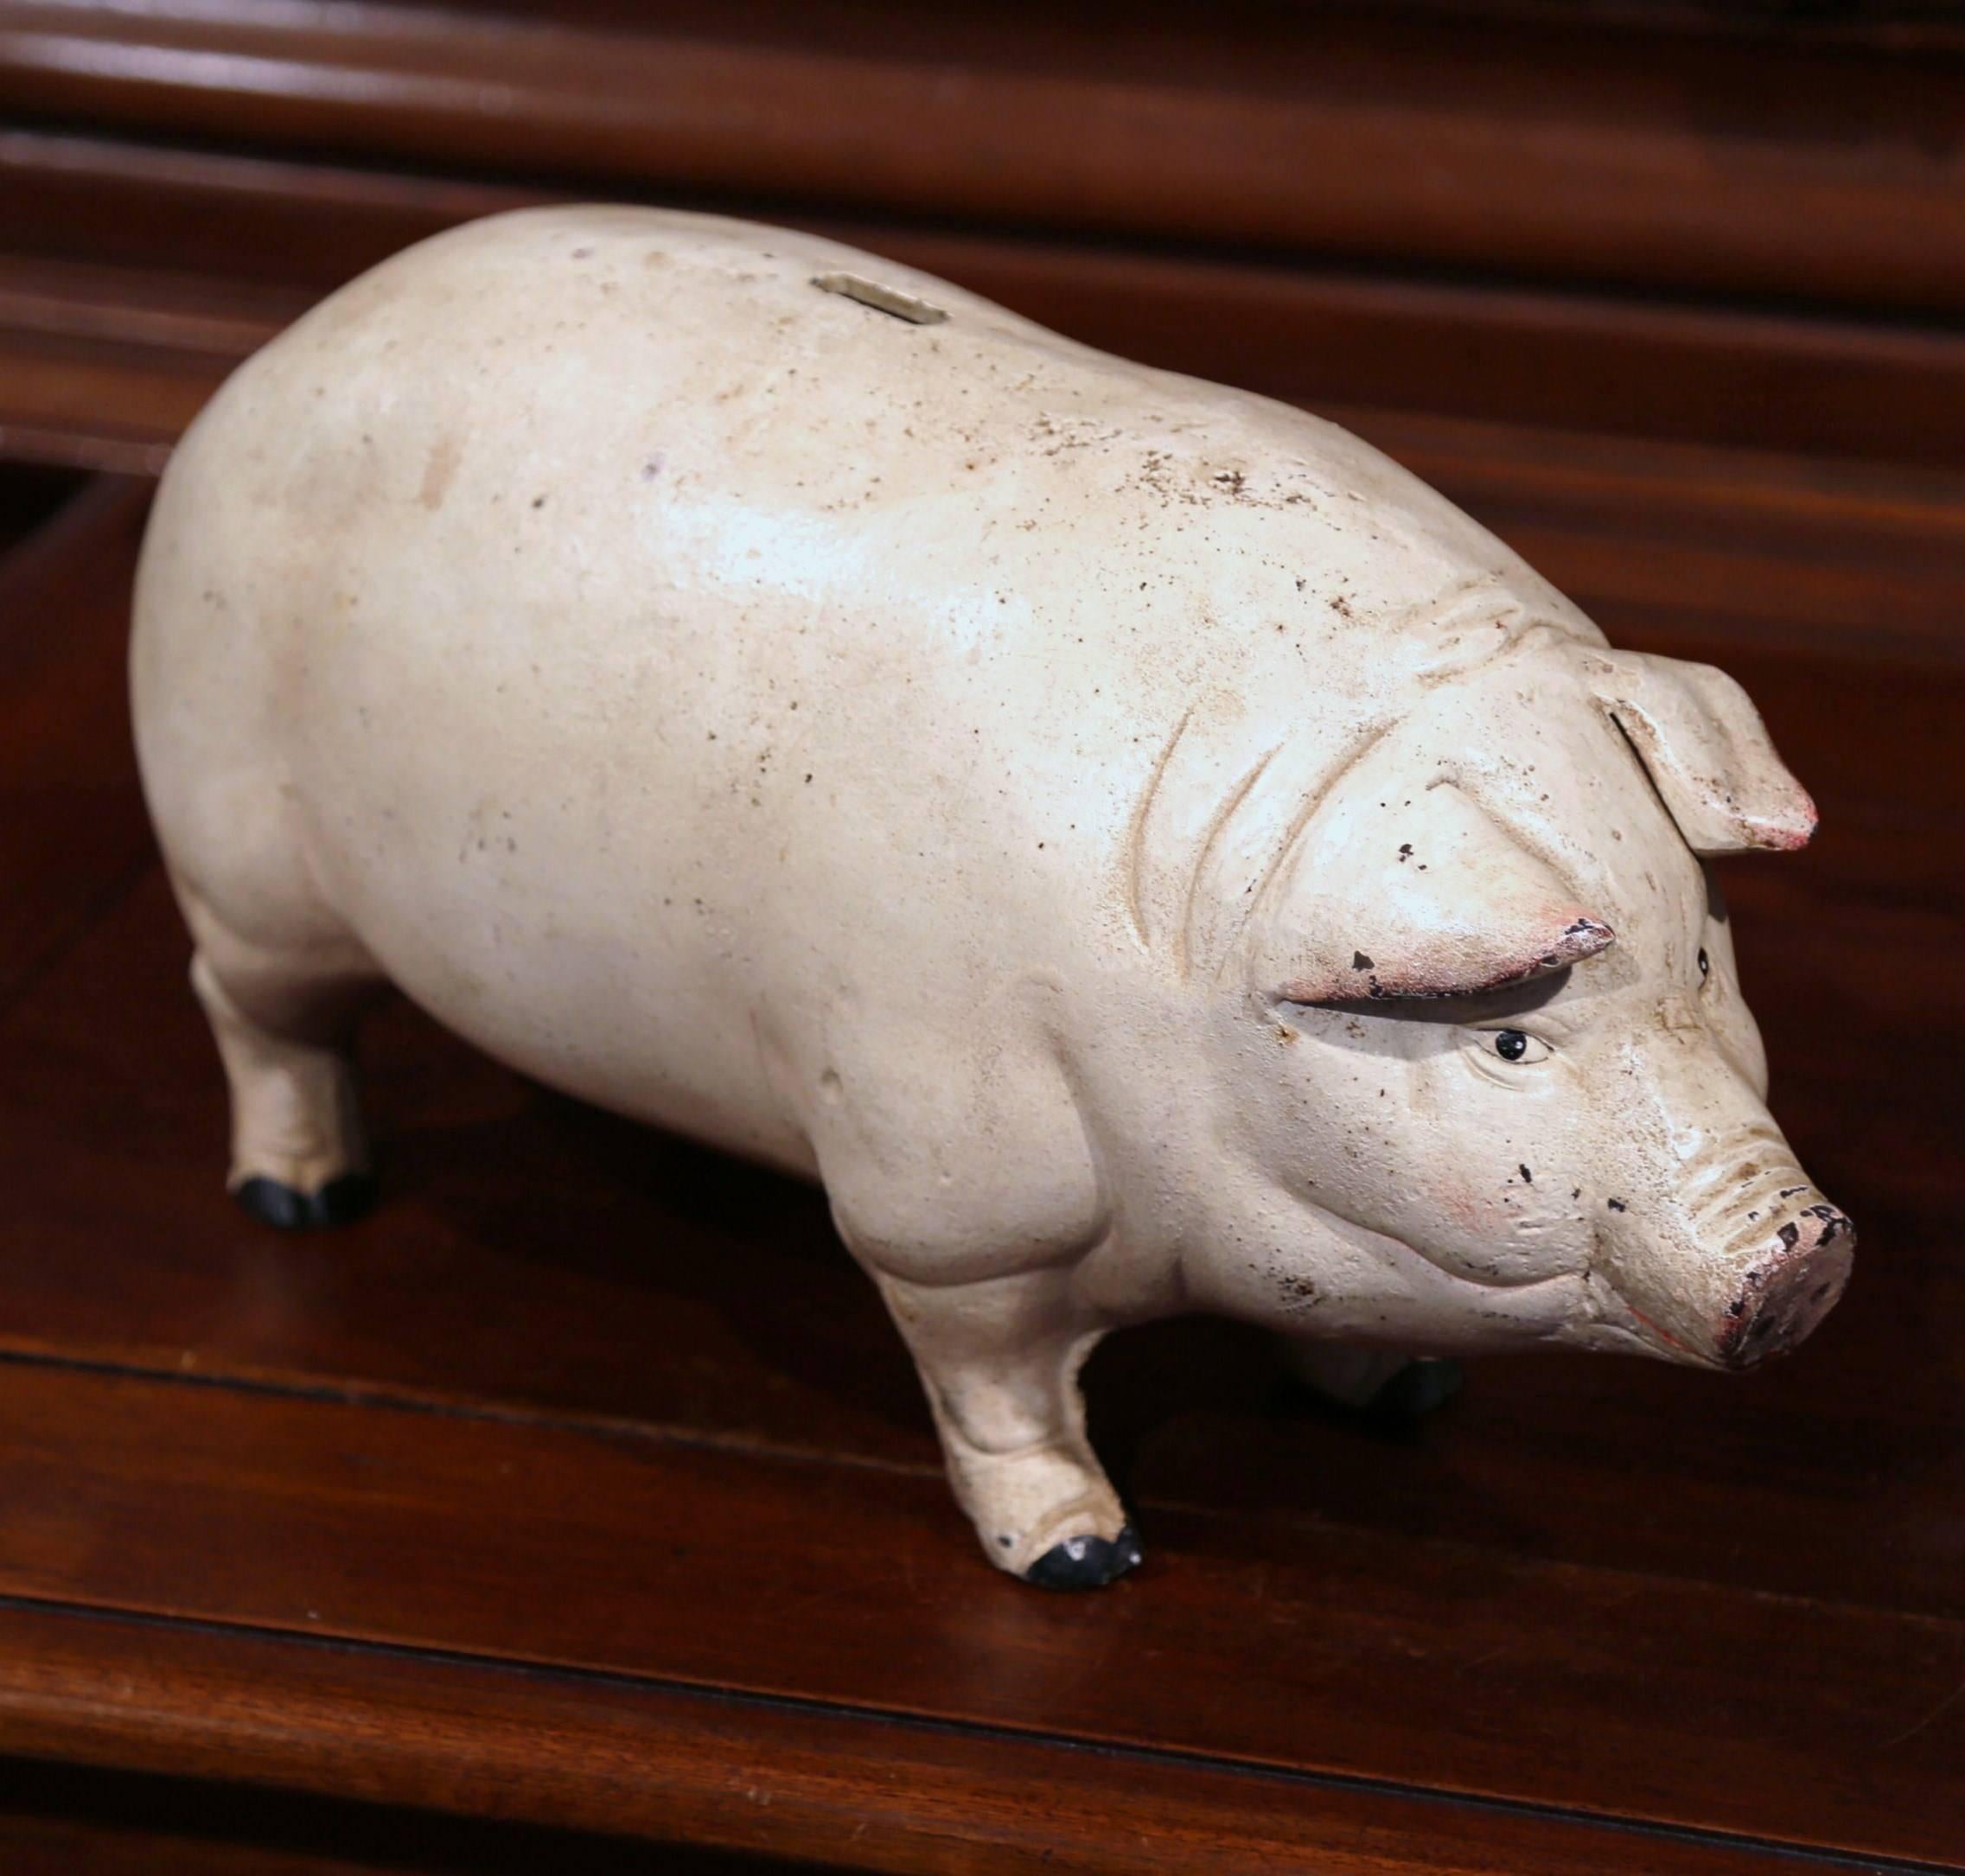 Crafted in France, circa 1880, the large hand painted iron pig sculpture has a beautiful beige patinated painted finish, and a very realistic shape and details. The bank is equipped with a slot for coins and a key open it and retreive the savings.